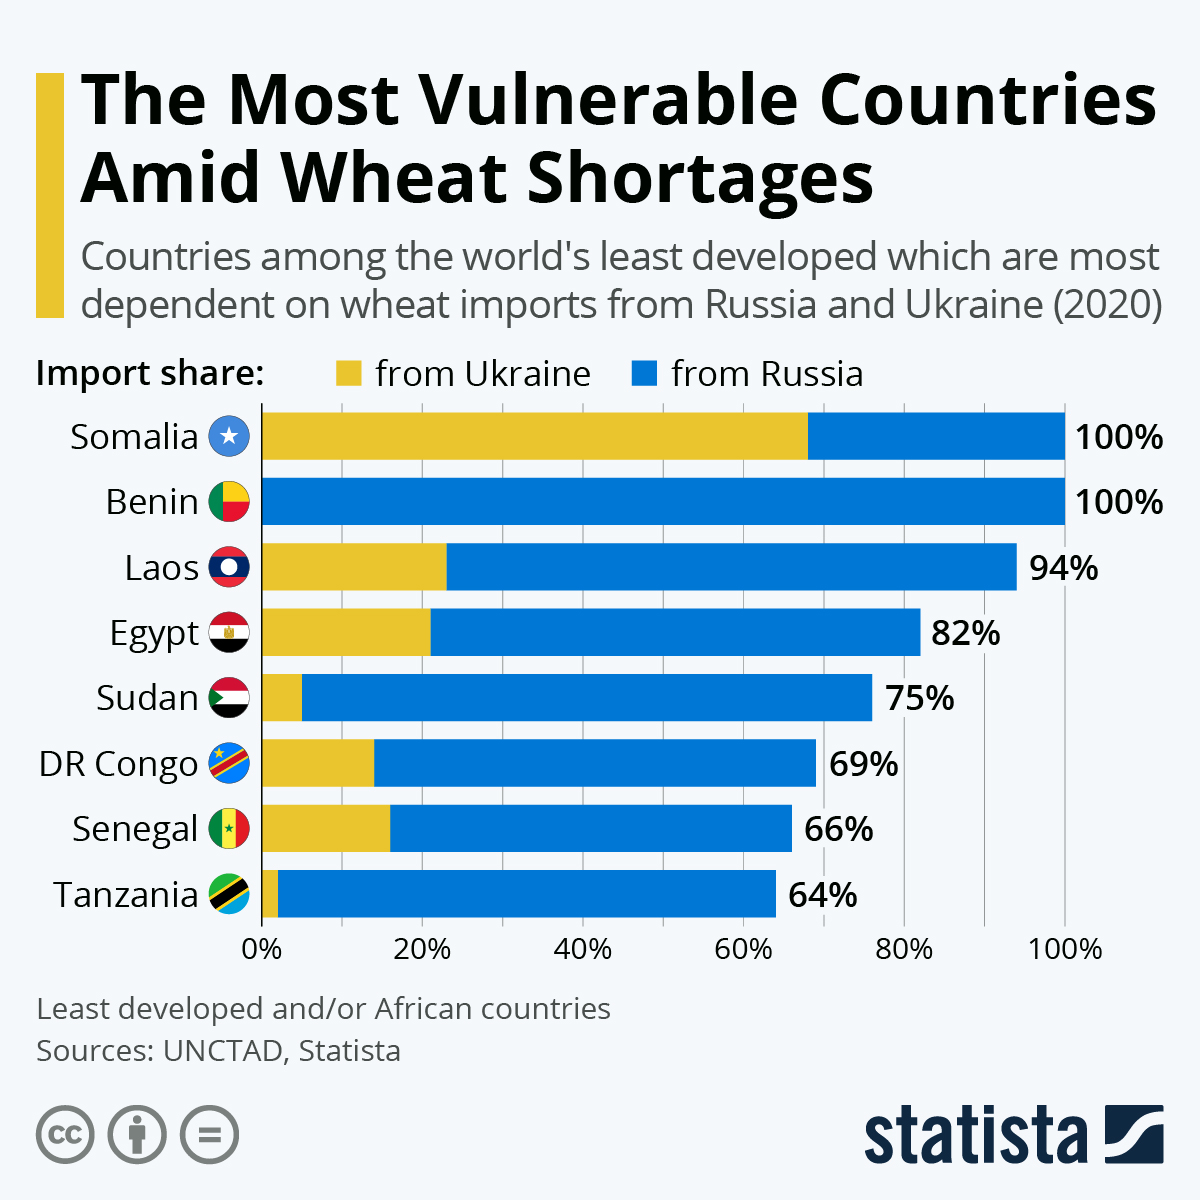 The Most Vulnerable Countries Amid Wheat Shortages